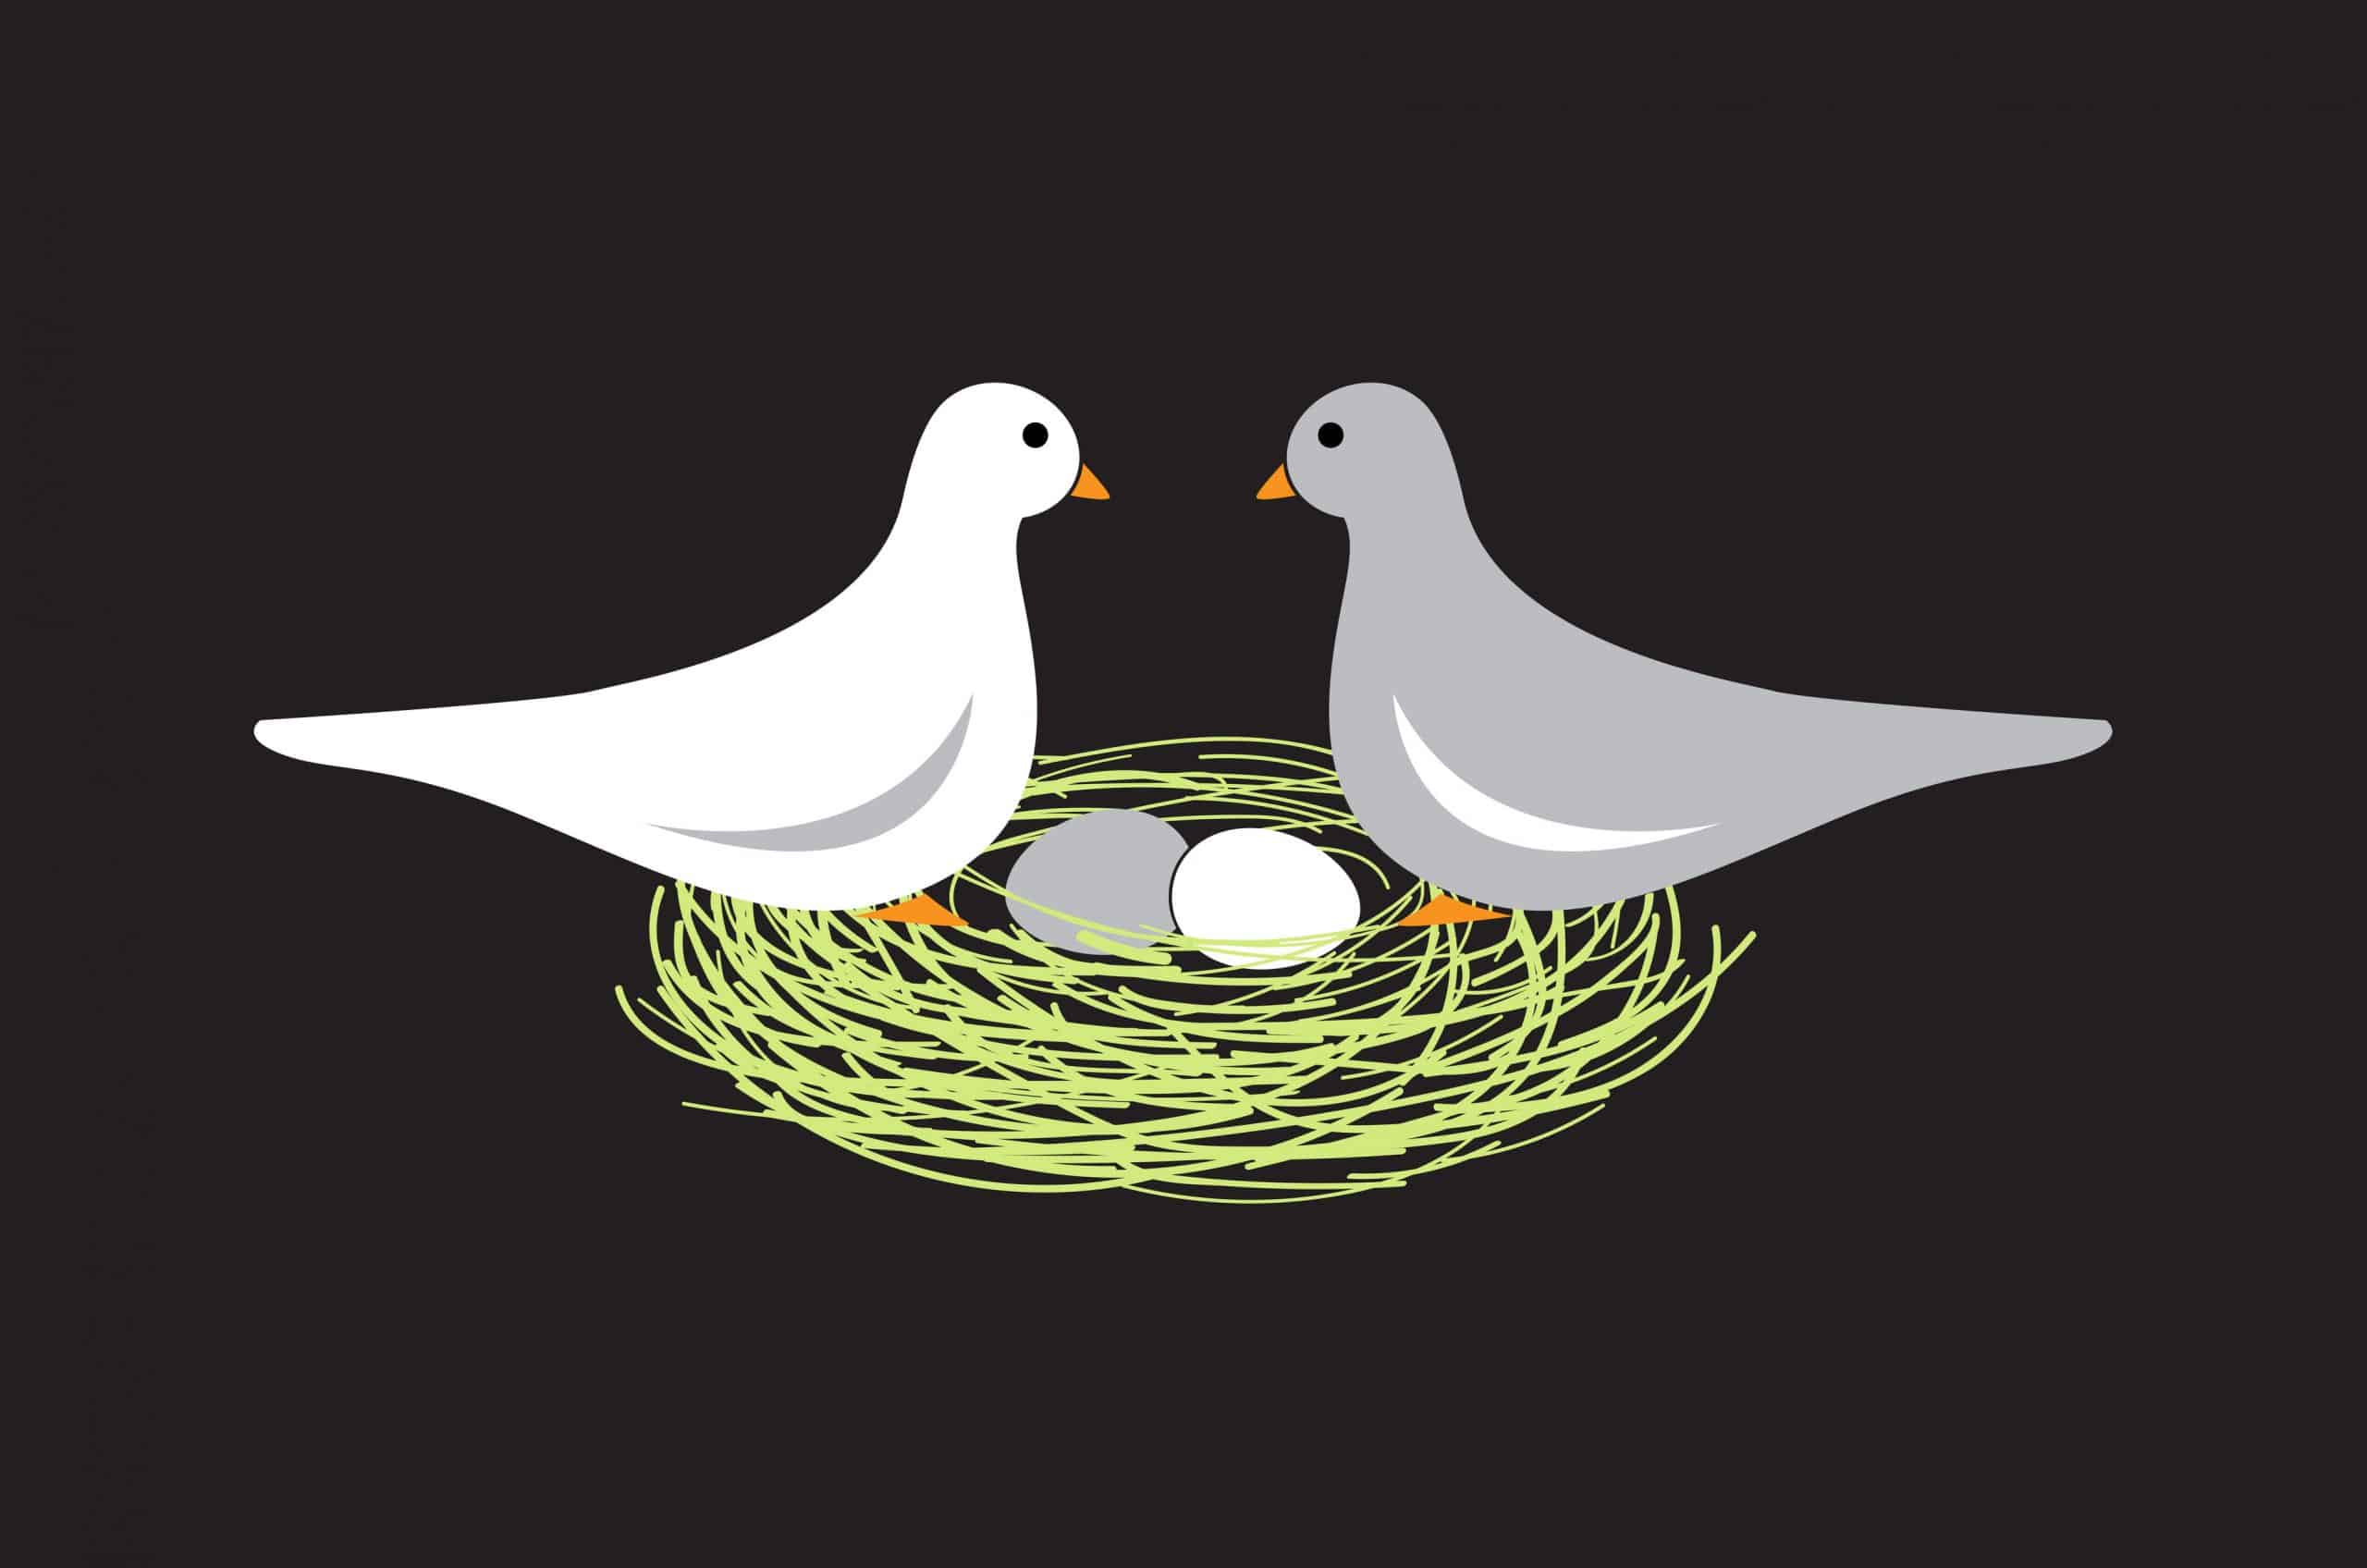 Two illustrated birds sit in a nest with two eggs